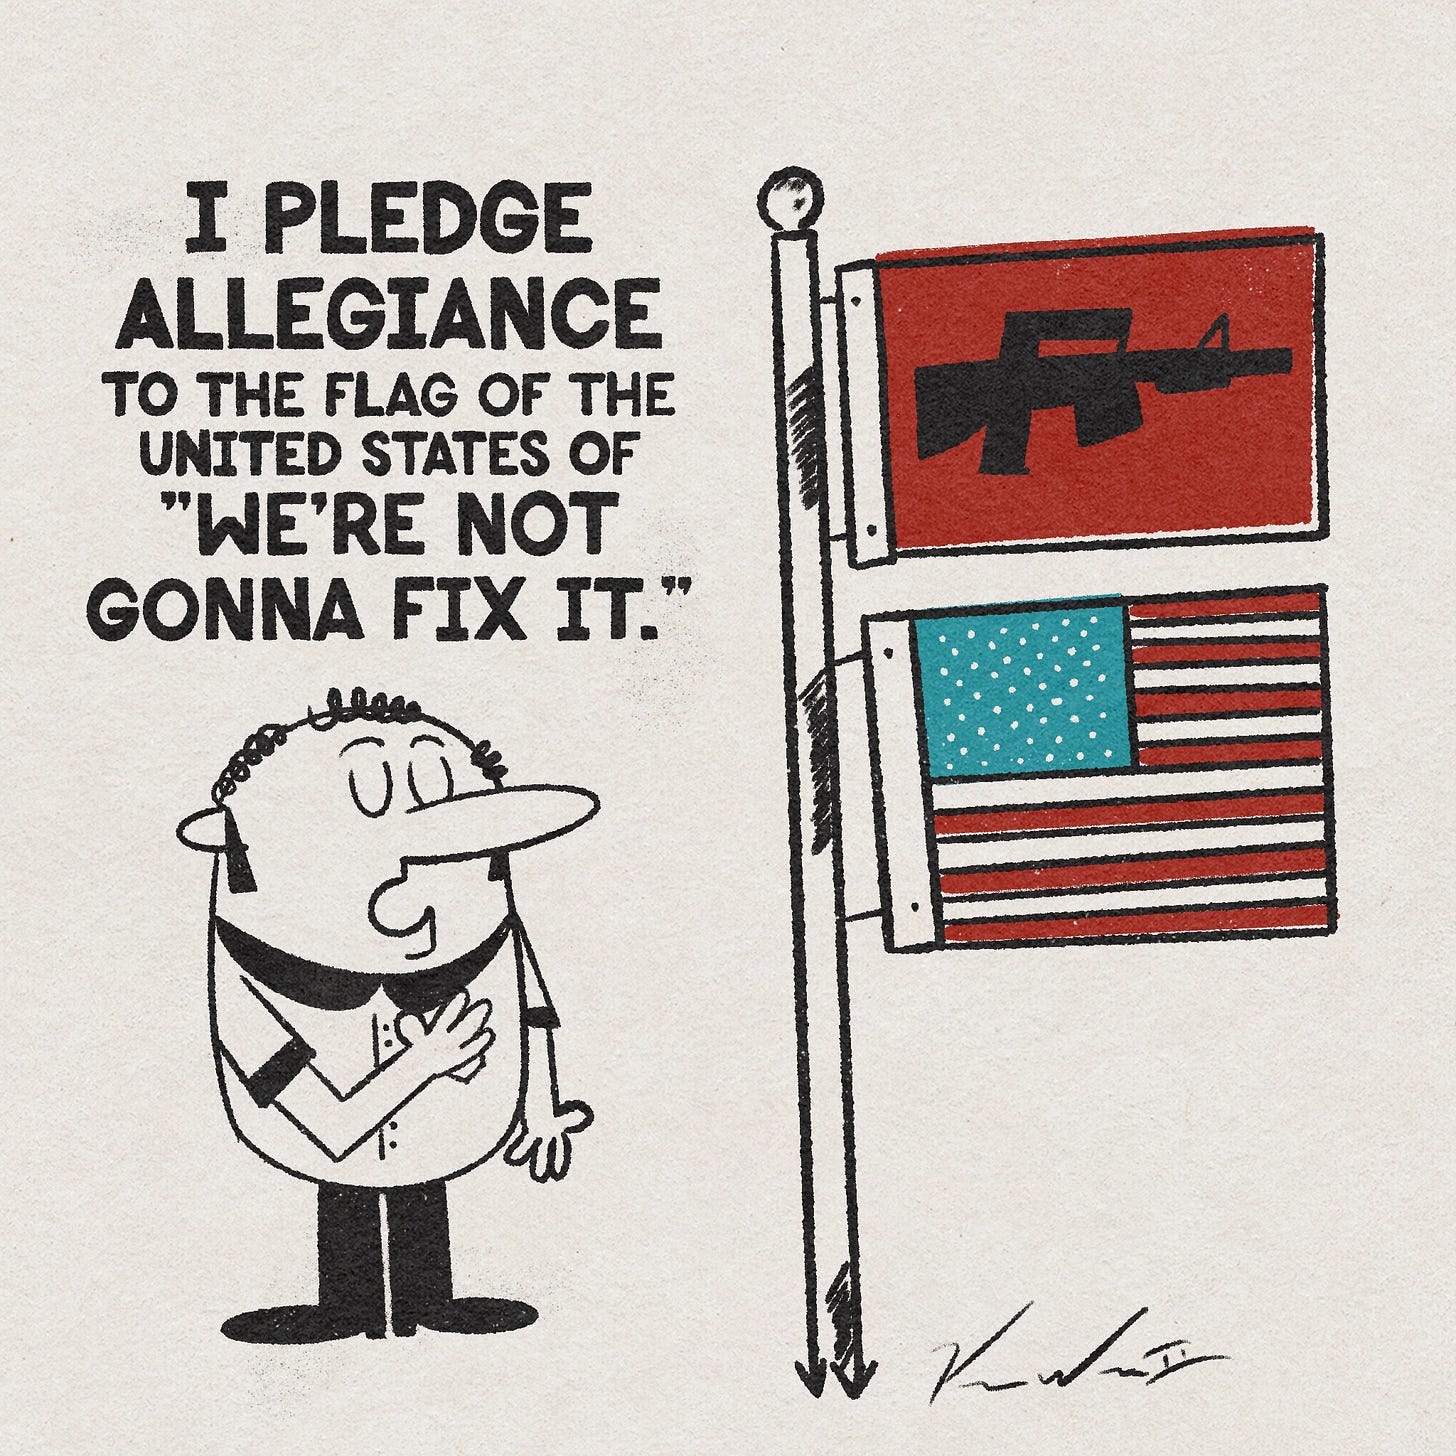 I pledge allegiance to the flag of the United States of "we're not gonna fix it". Person pledges to a flag of an Ar-15.